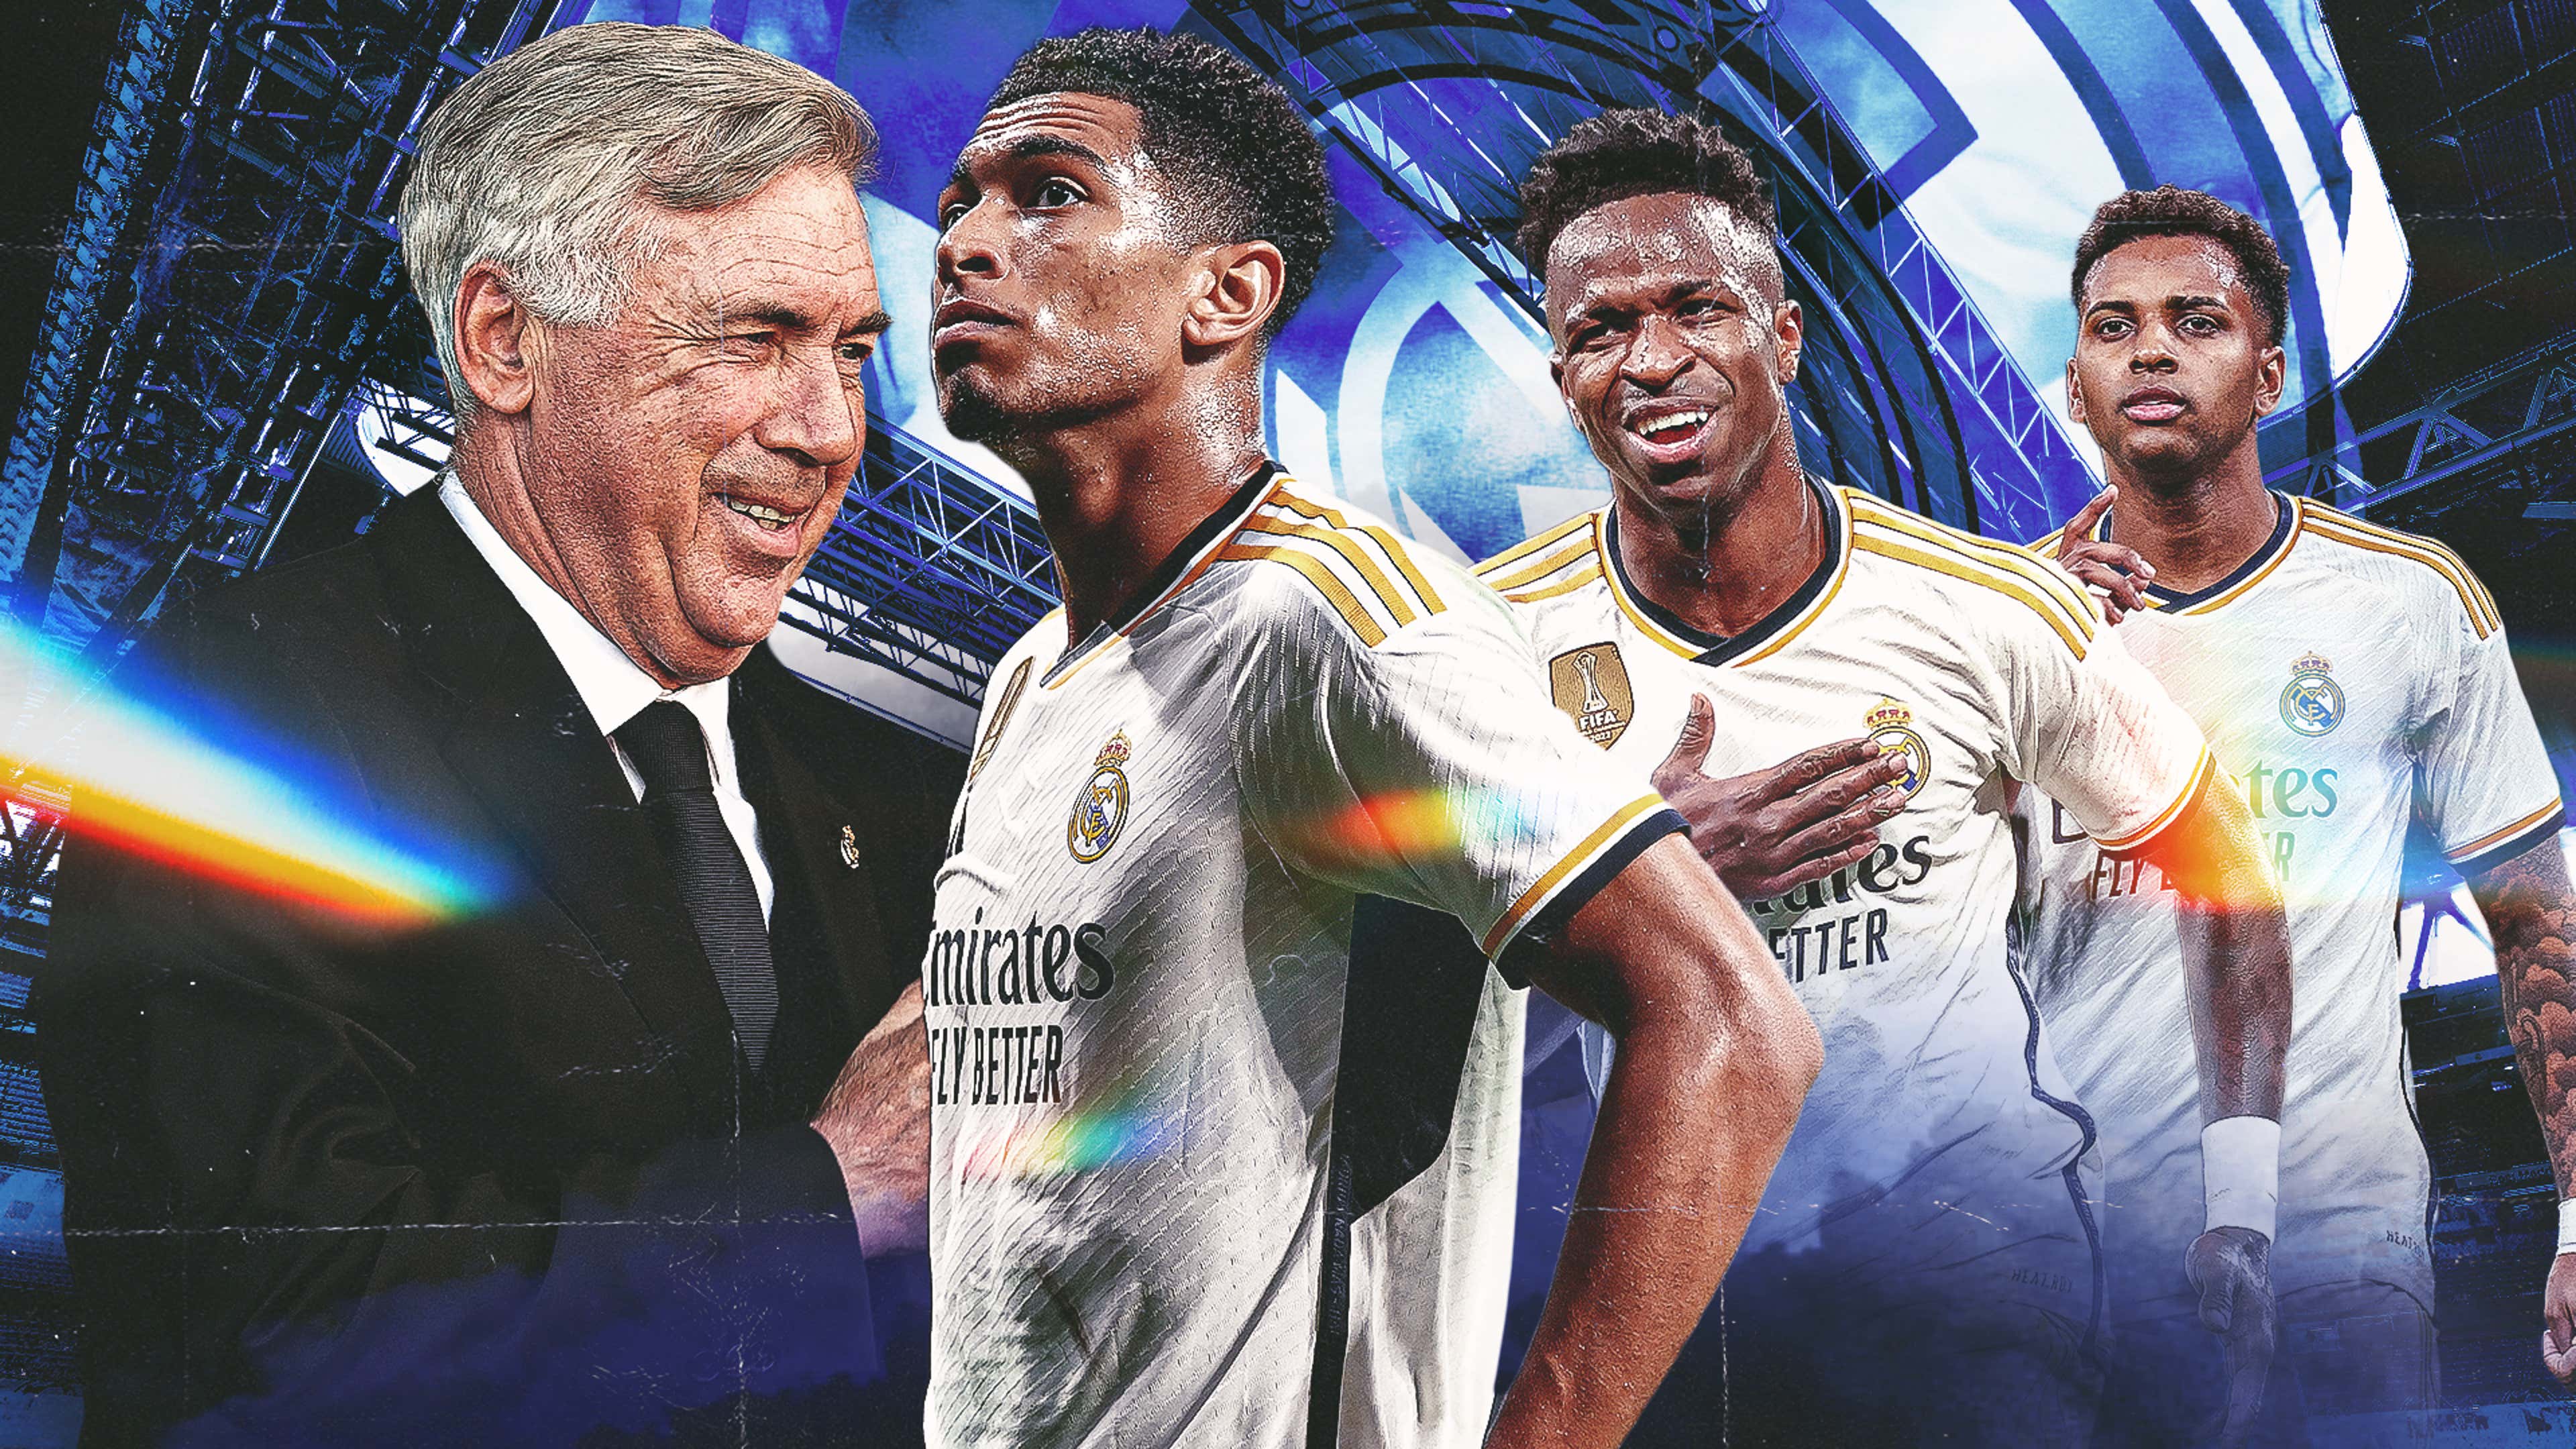 Real Madrid a team in transition, says Ancelotti ahead of Cup